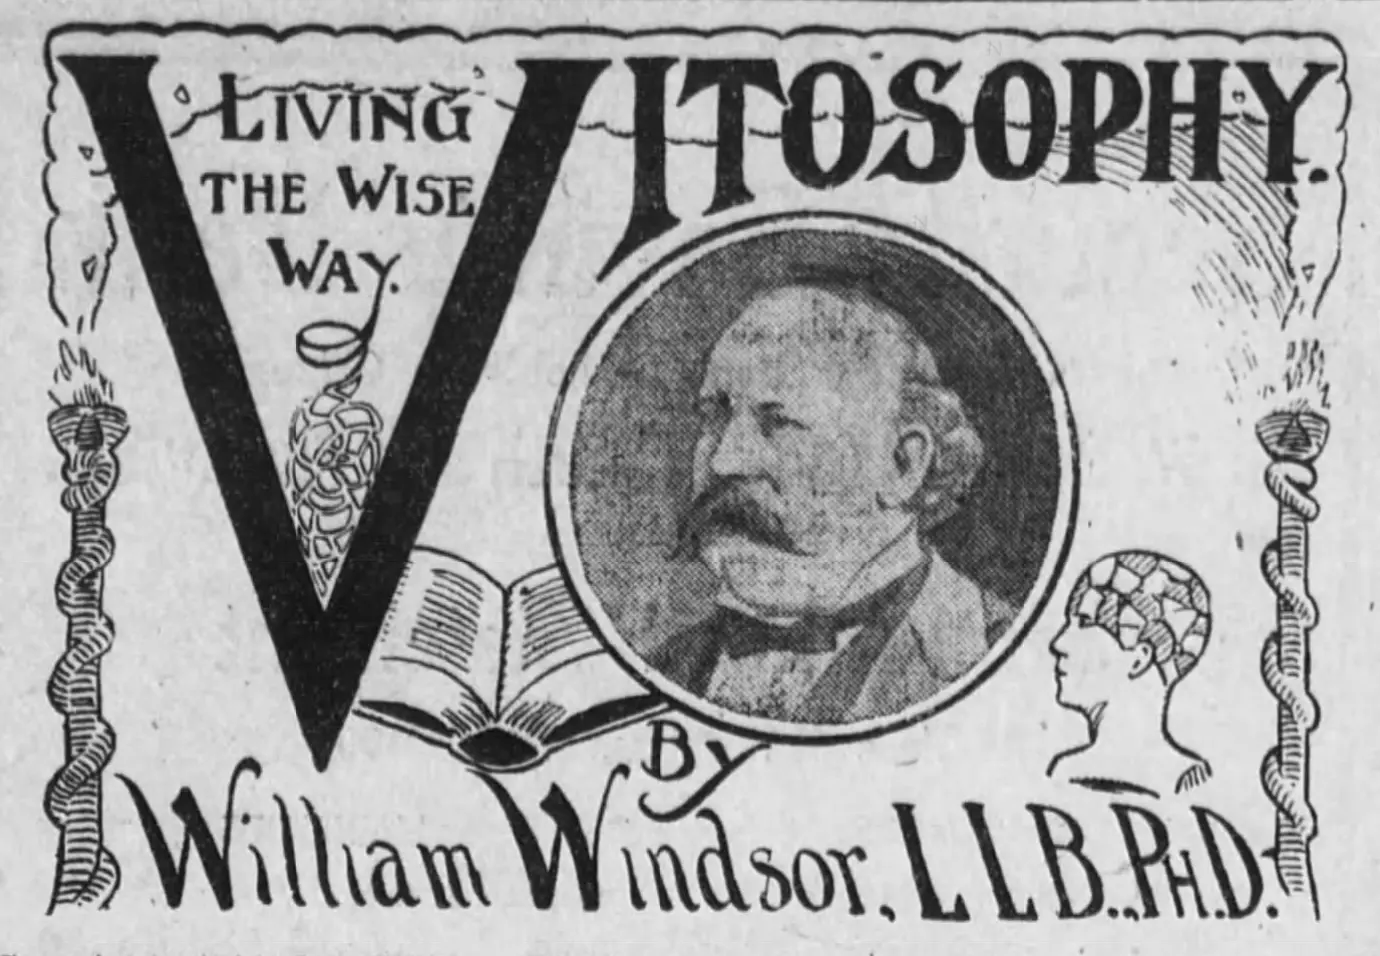 Newspaper ad for vitosophy, 1907